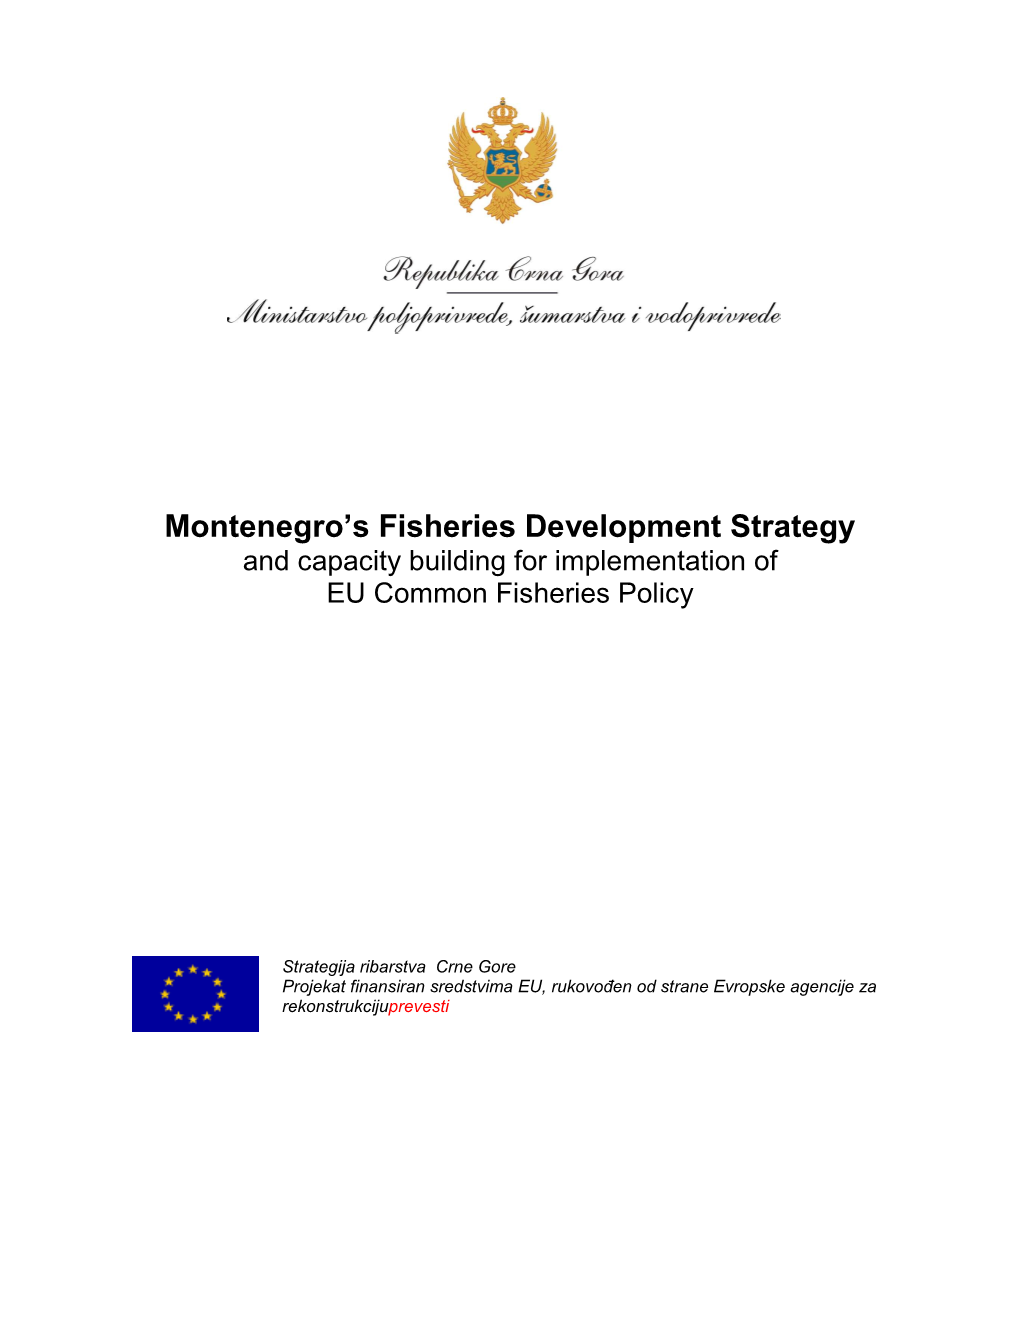 Montenegro's Fisheries Development Strategy and Capacity Building For